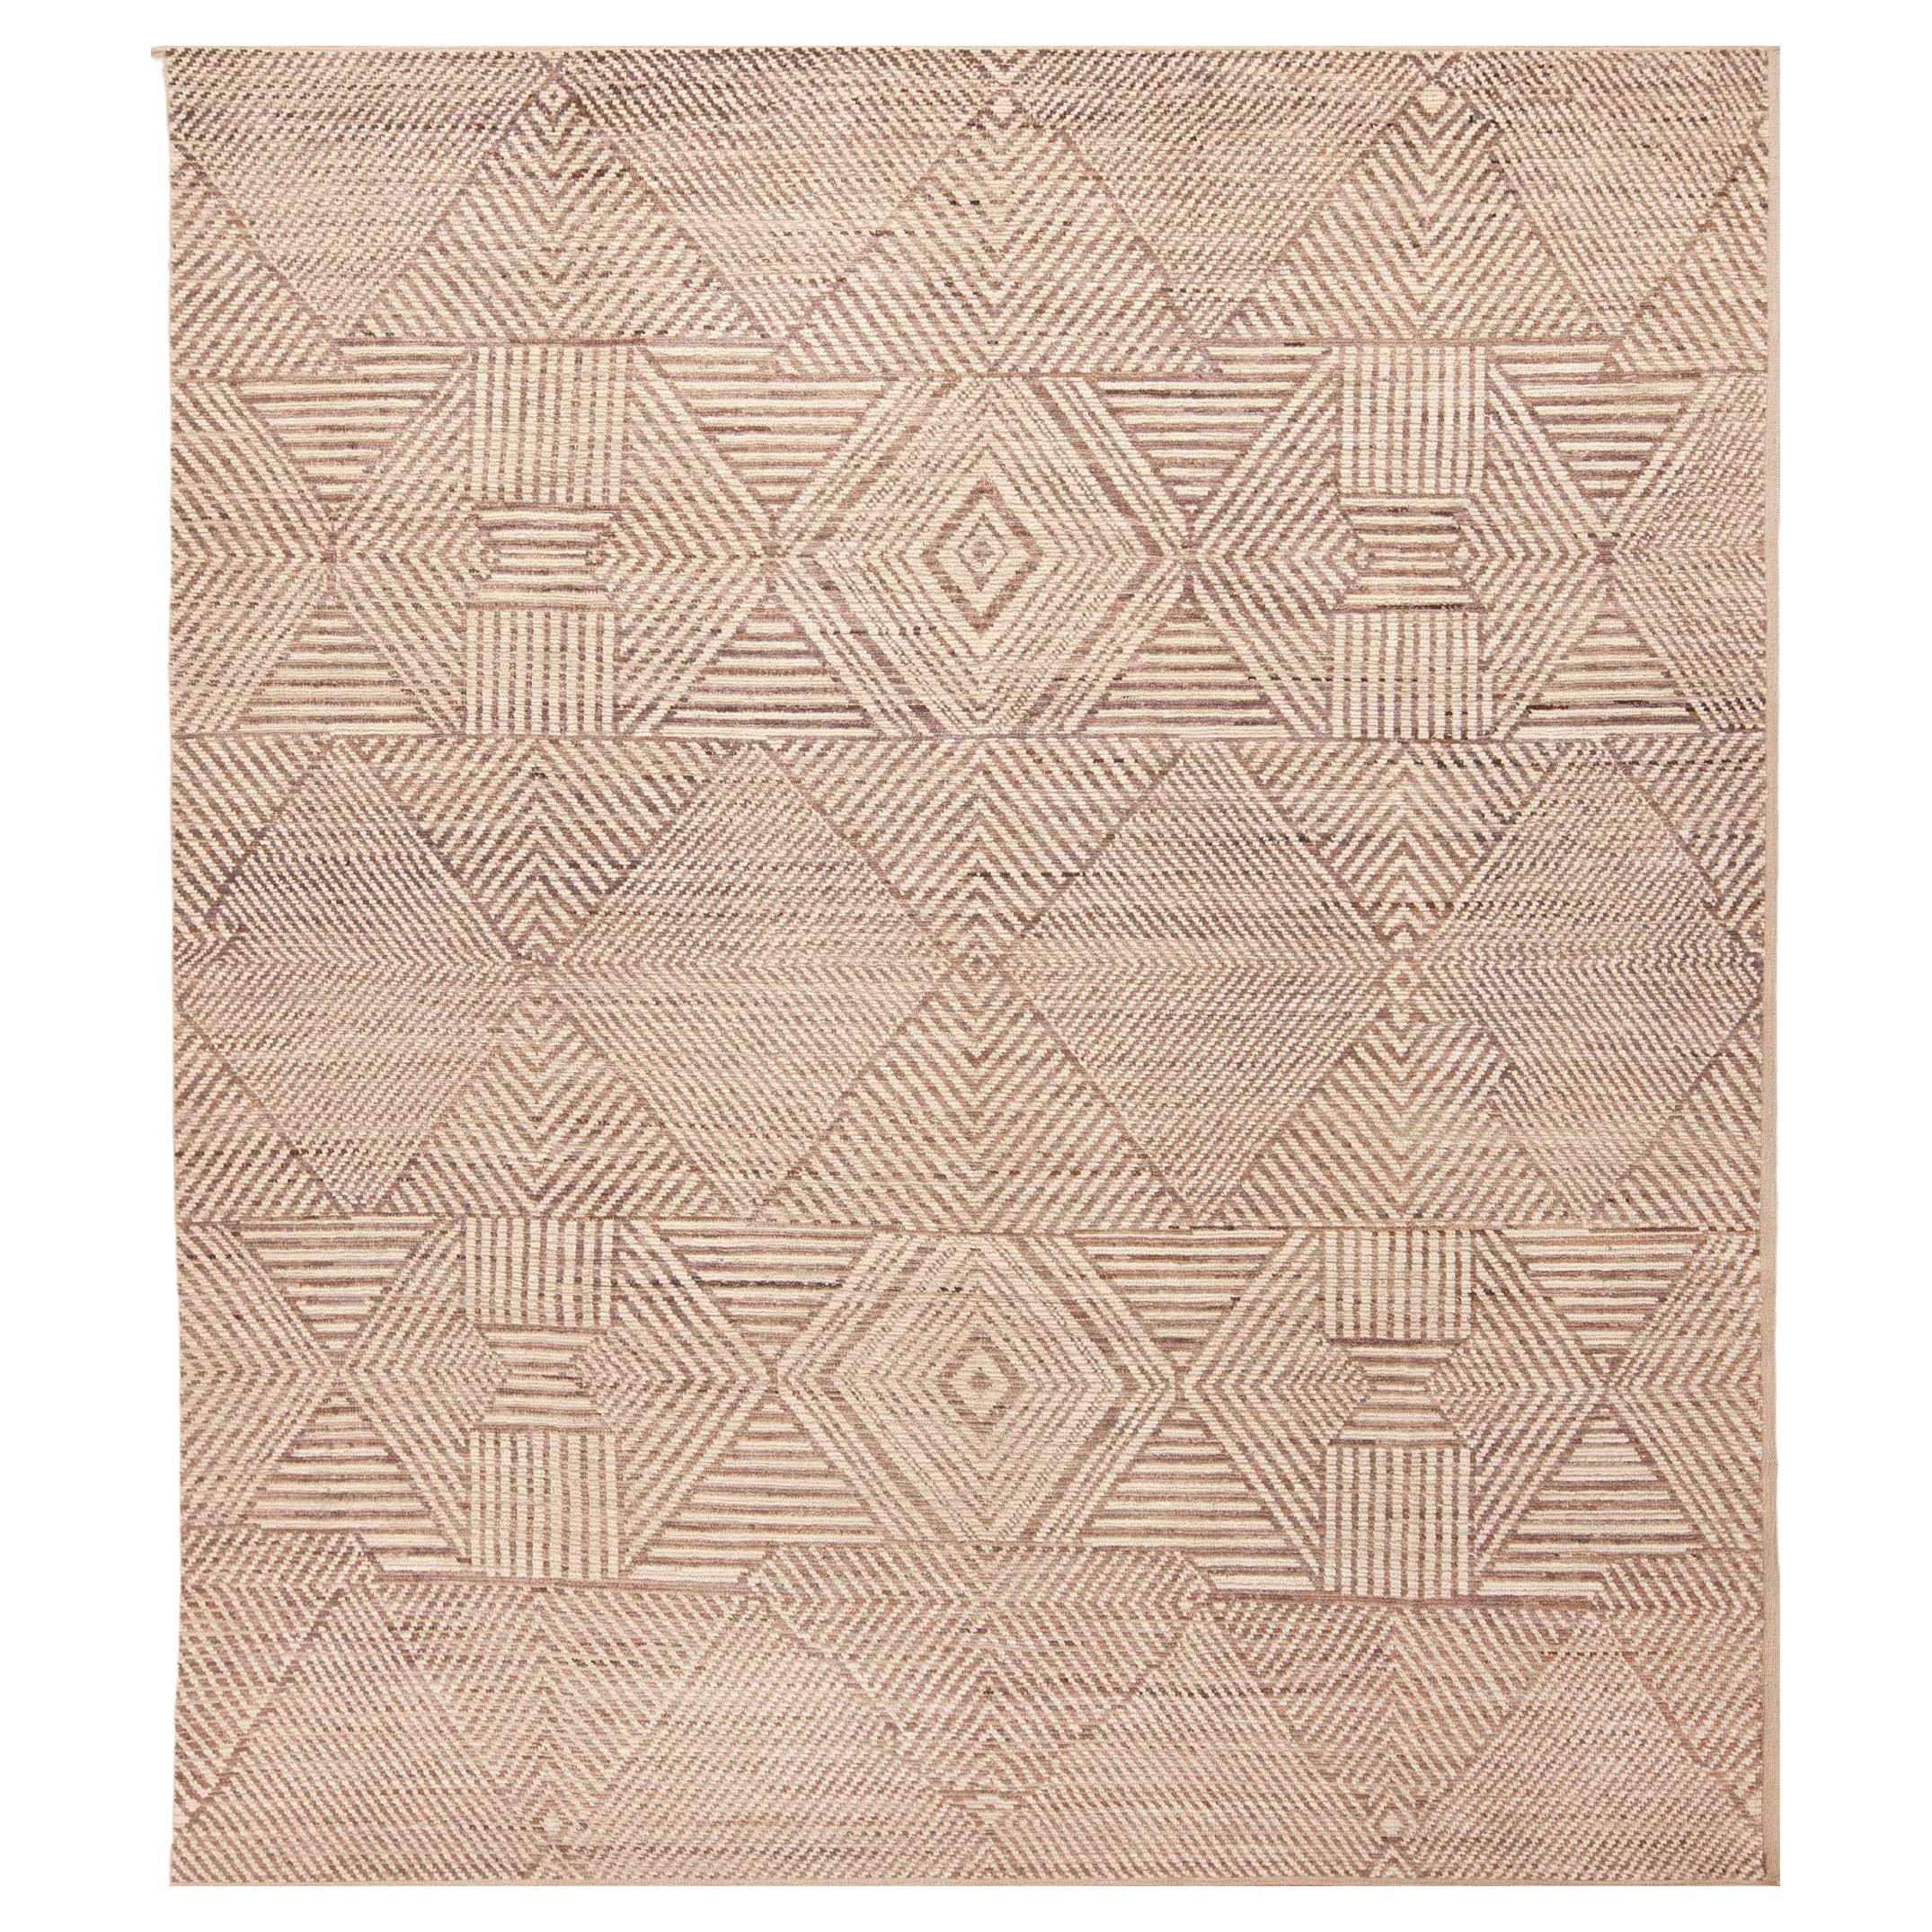 Nazmiyal Collection Tribal Design Modern Neutral Color Area Rug 9' x 10'